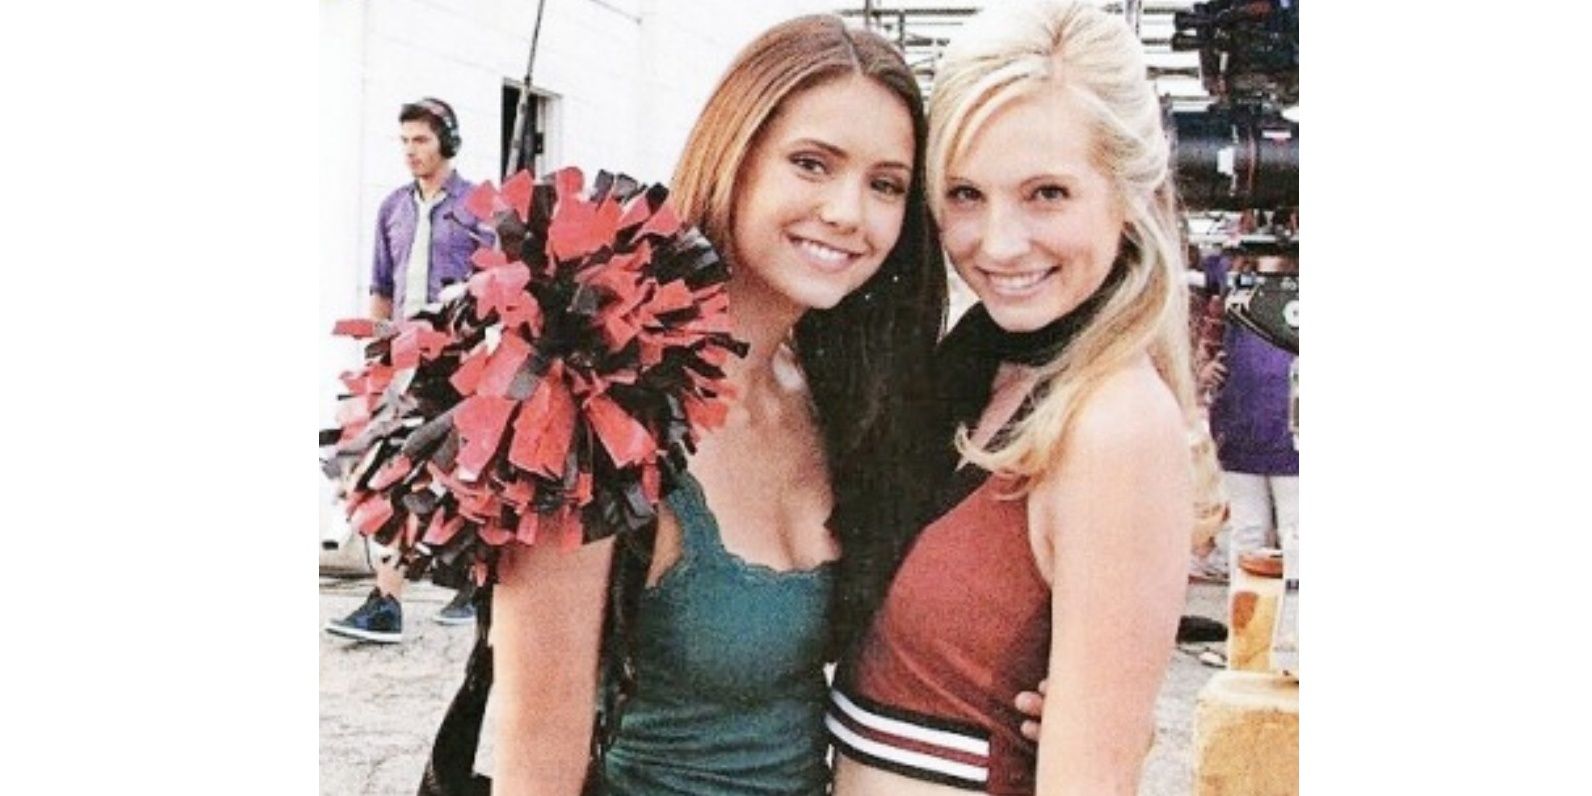 10 Best Behind The Scenes Photos From The Vampire Diaries